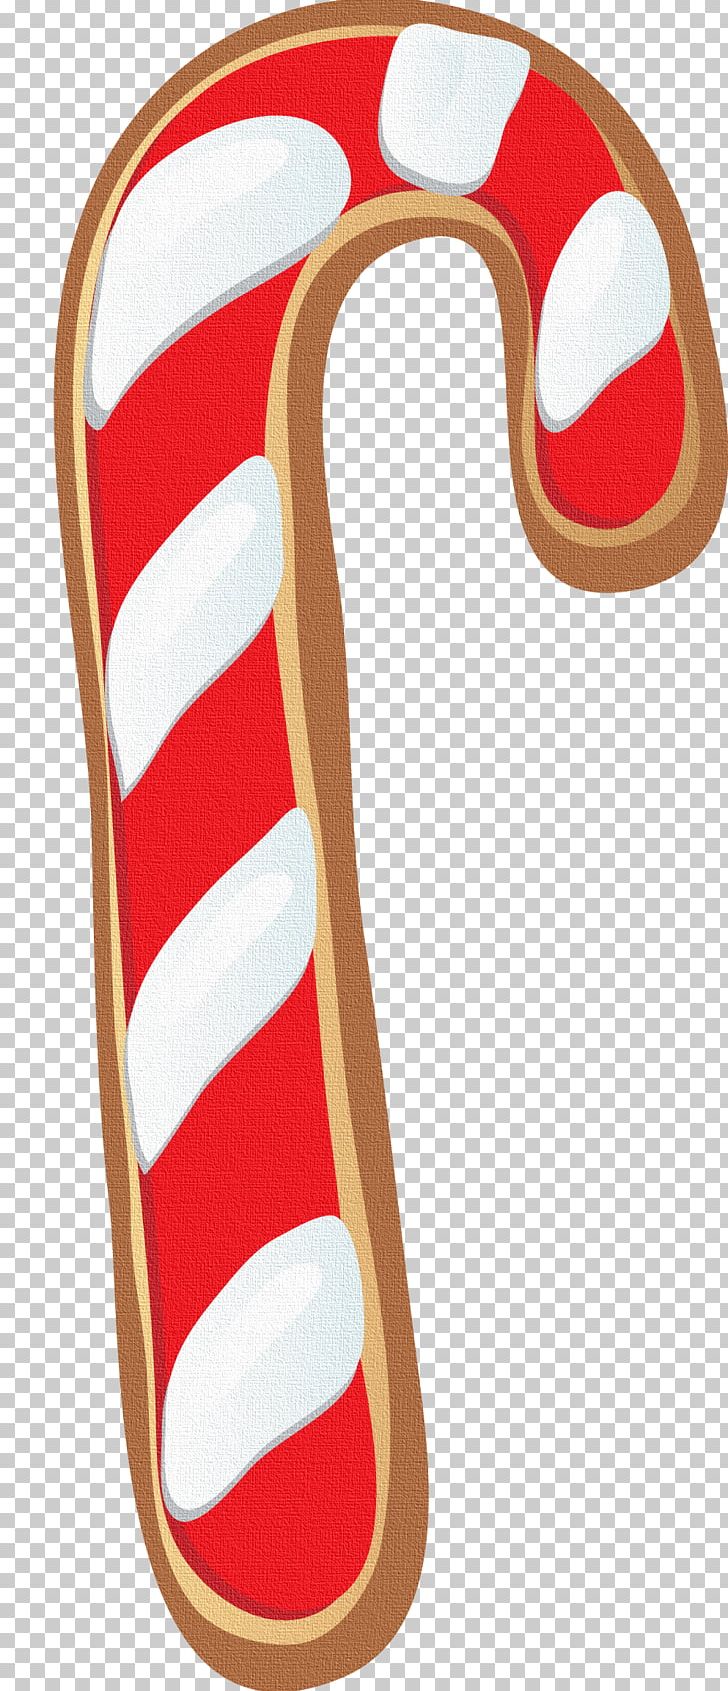 Candy Cane Santa Claus Christmas Tree PNG, Clipart, Area, Candy, Candy Cane, Cane, Christmas Free PNG Download